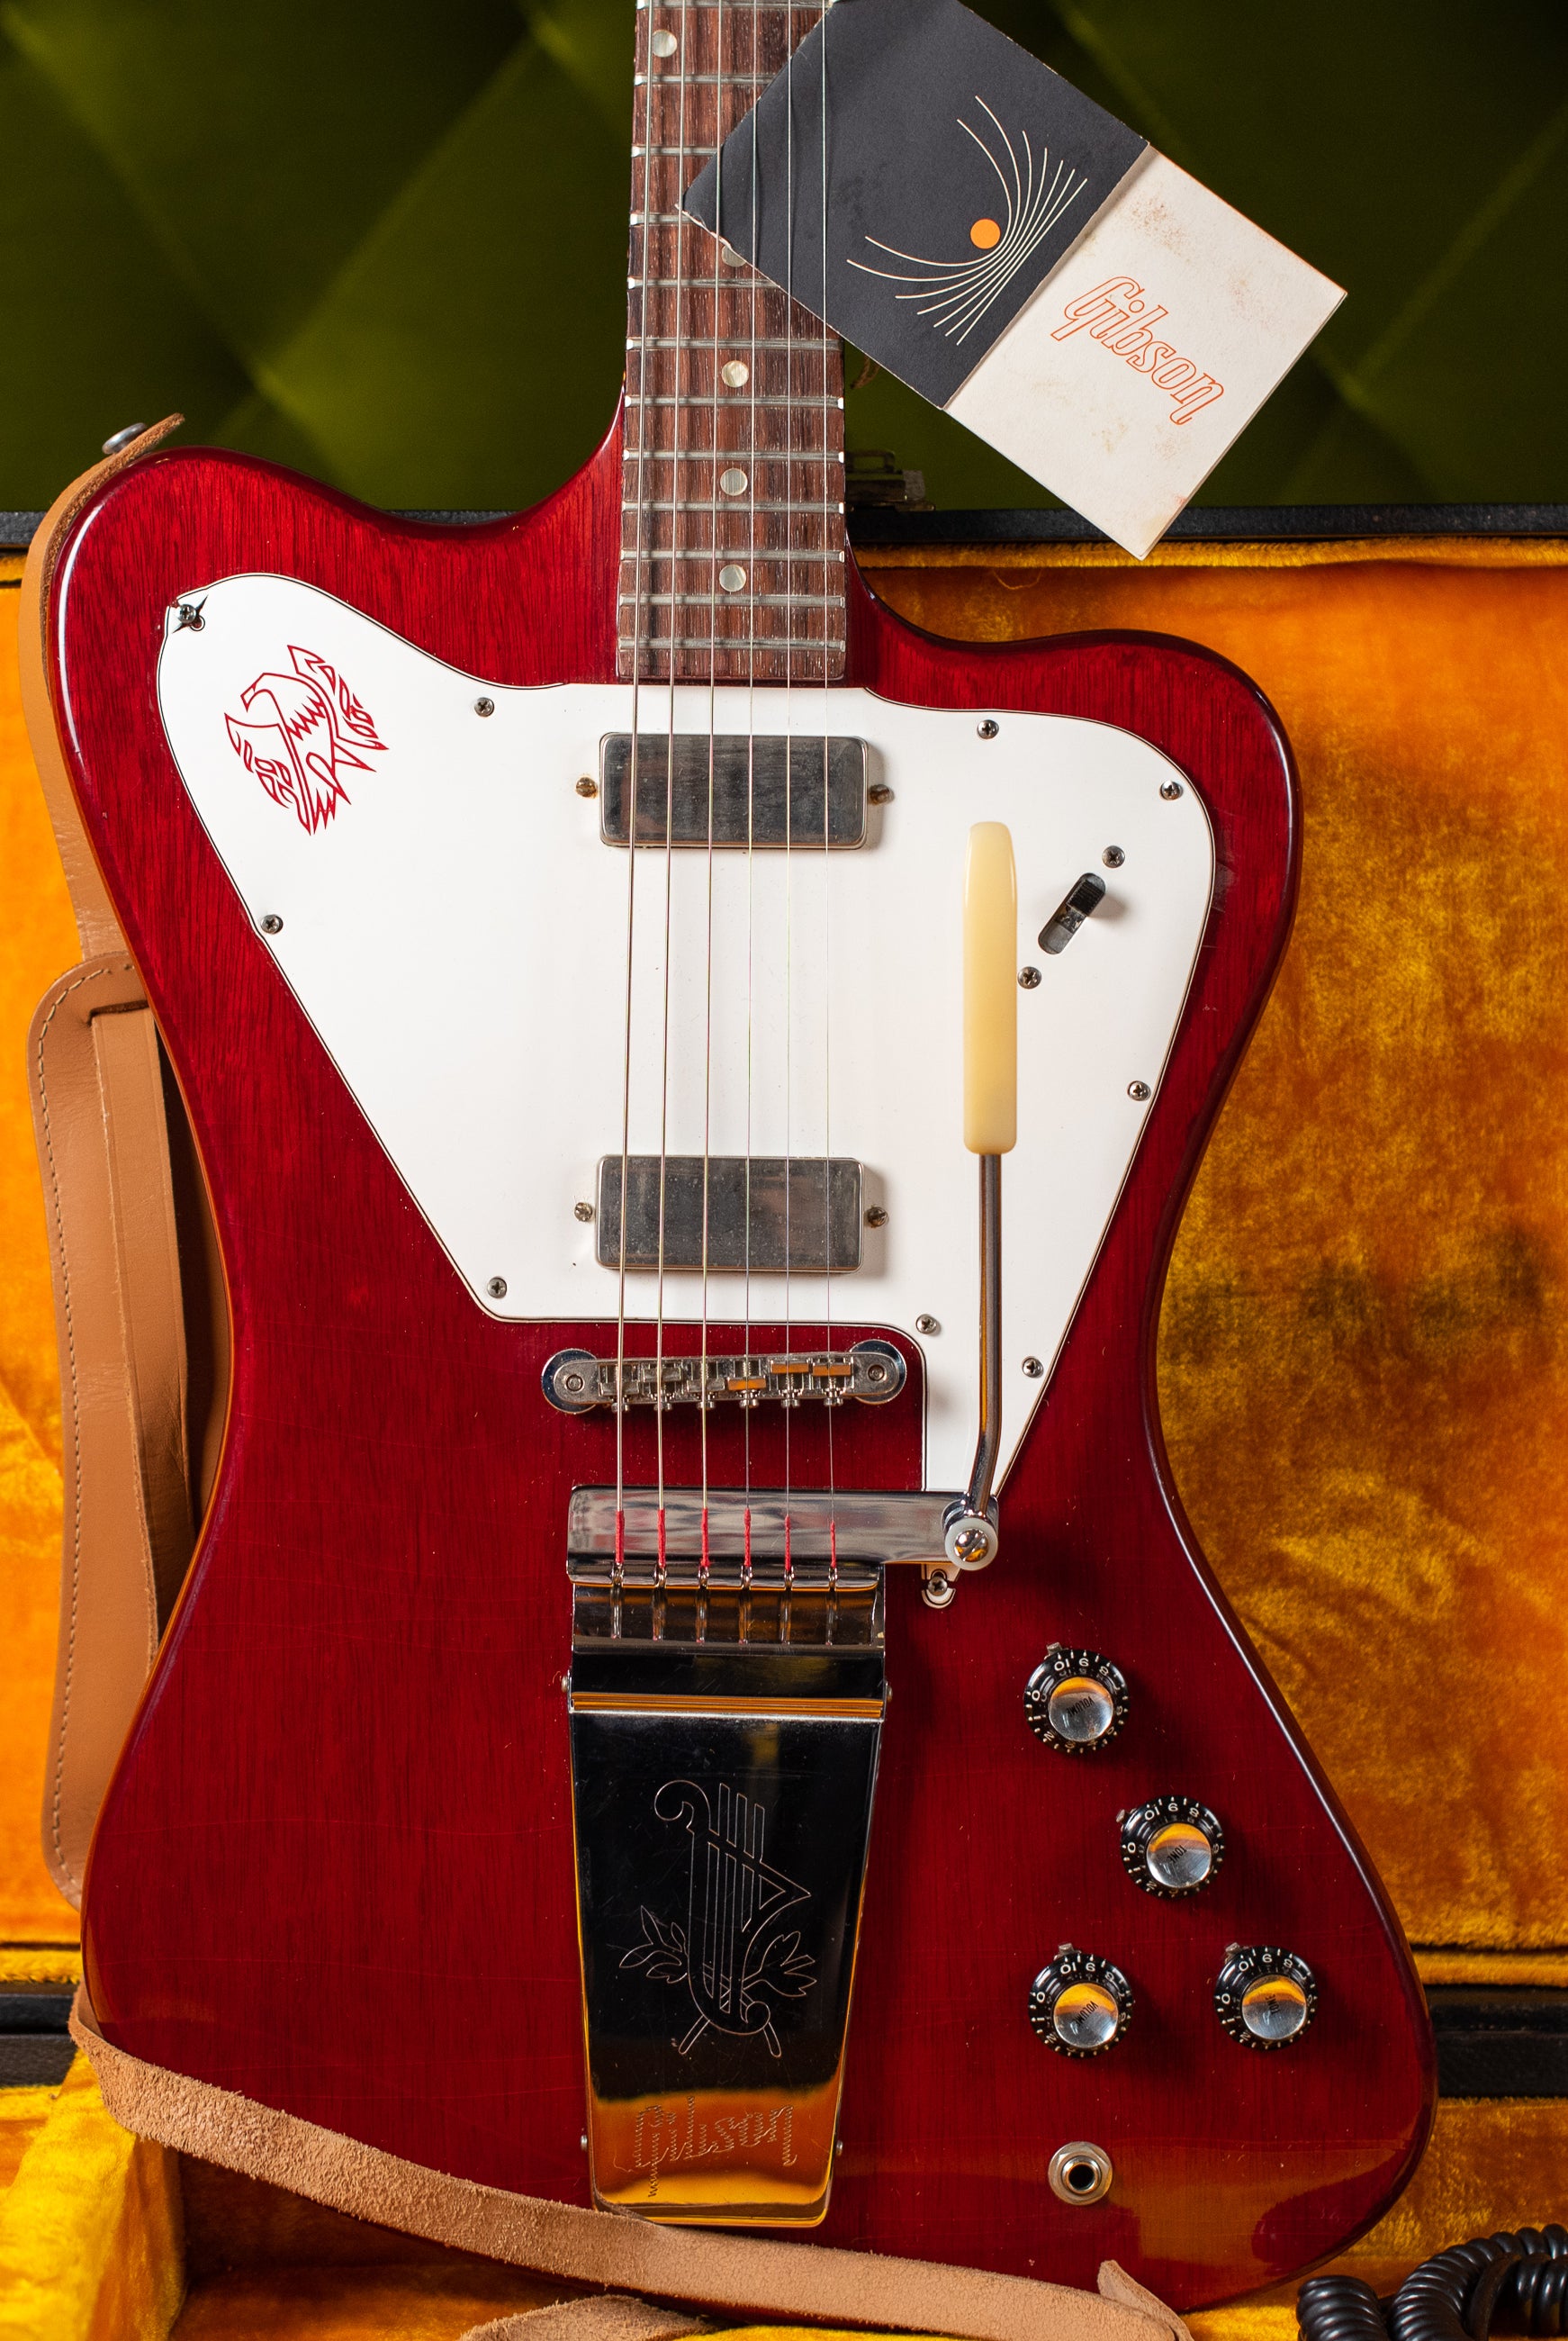 Vintage 1965 Gibson Firebird V Cherry Red electric guitar